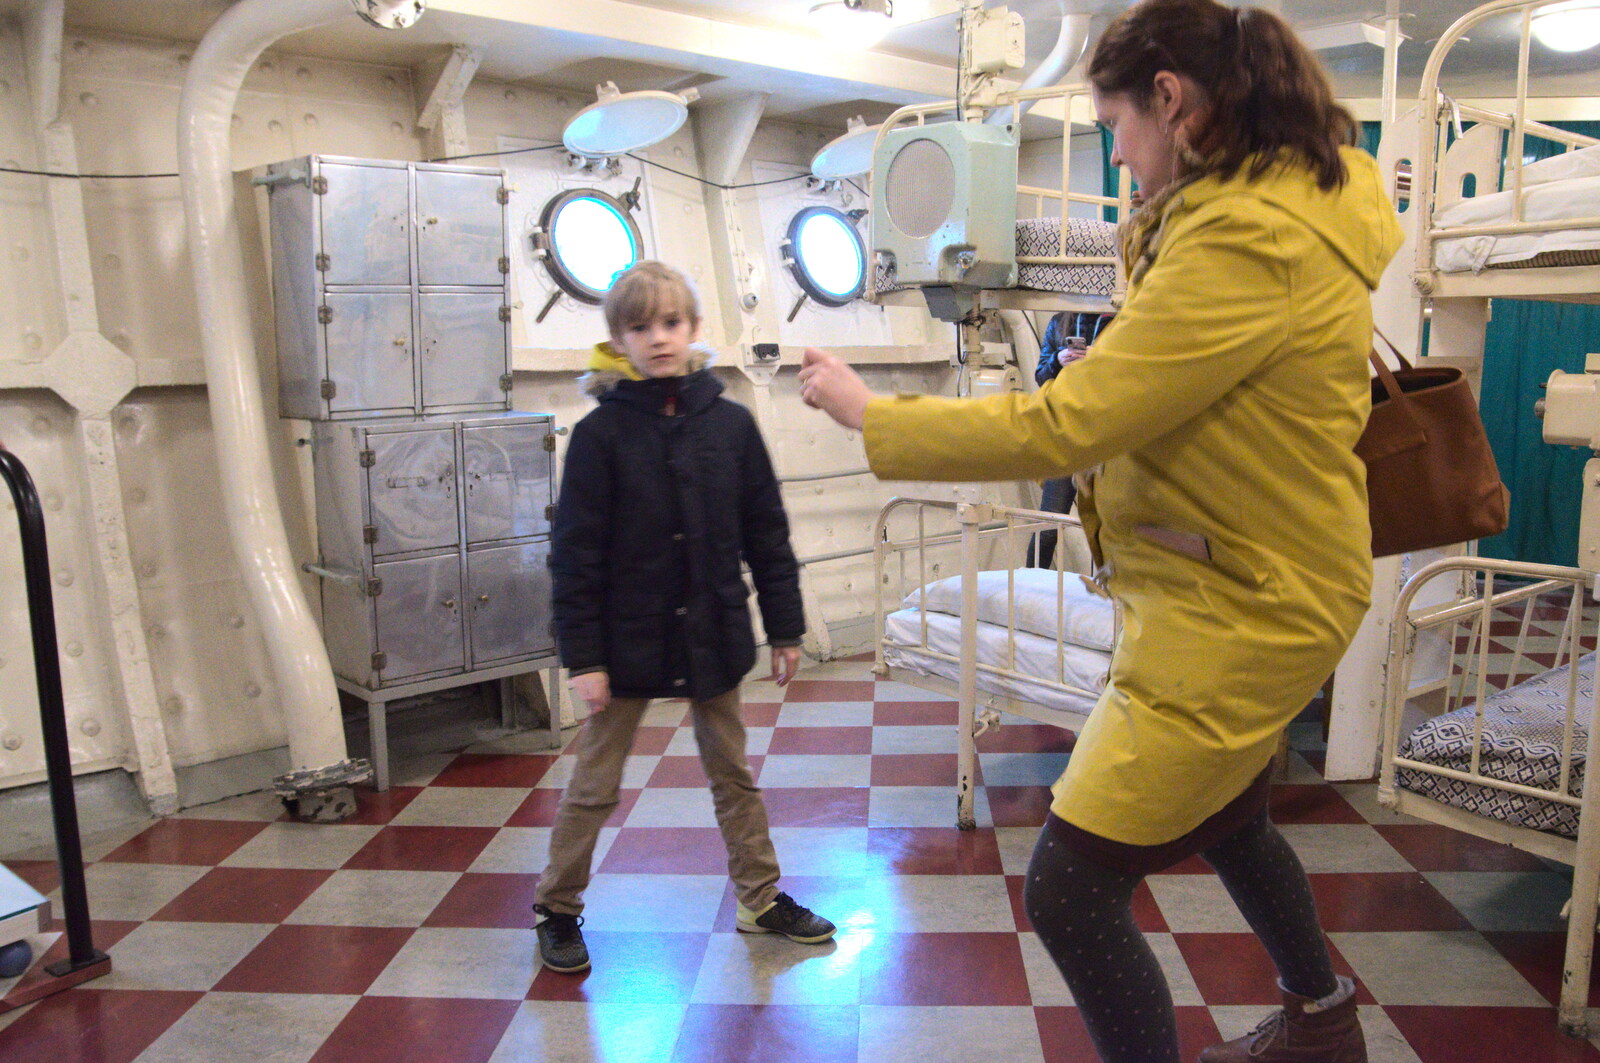 Harry and Isobel do some dancing from HMS Belfast and the South Bank, Southwark, London - 17th February 2020